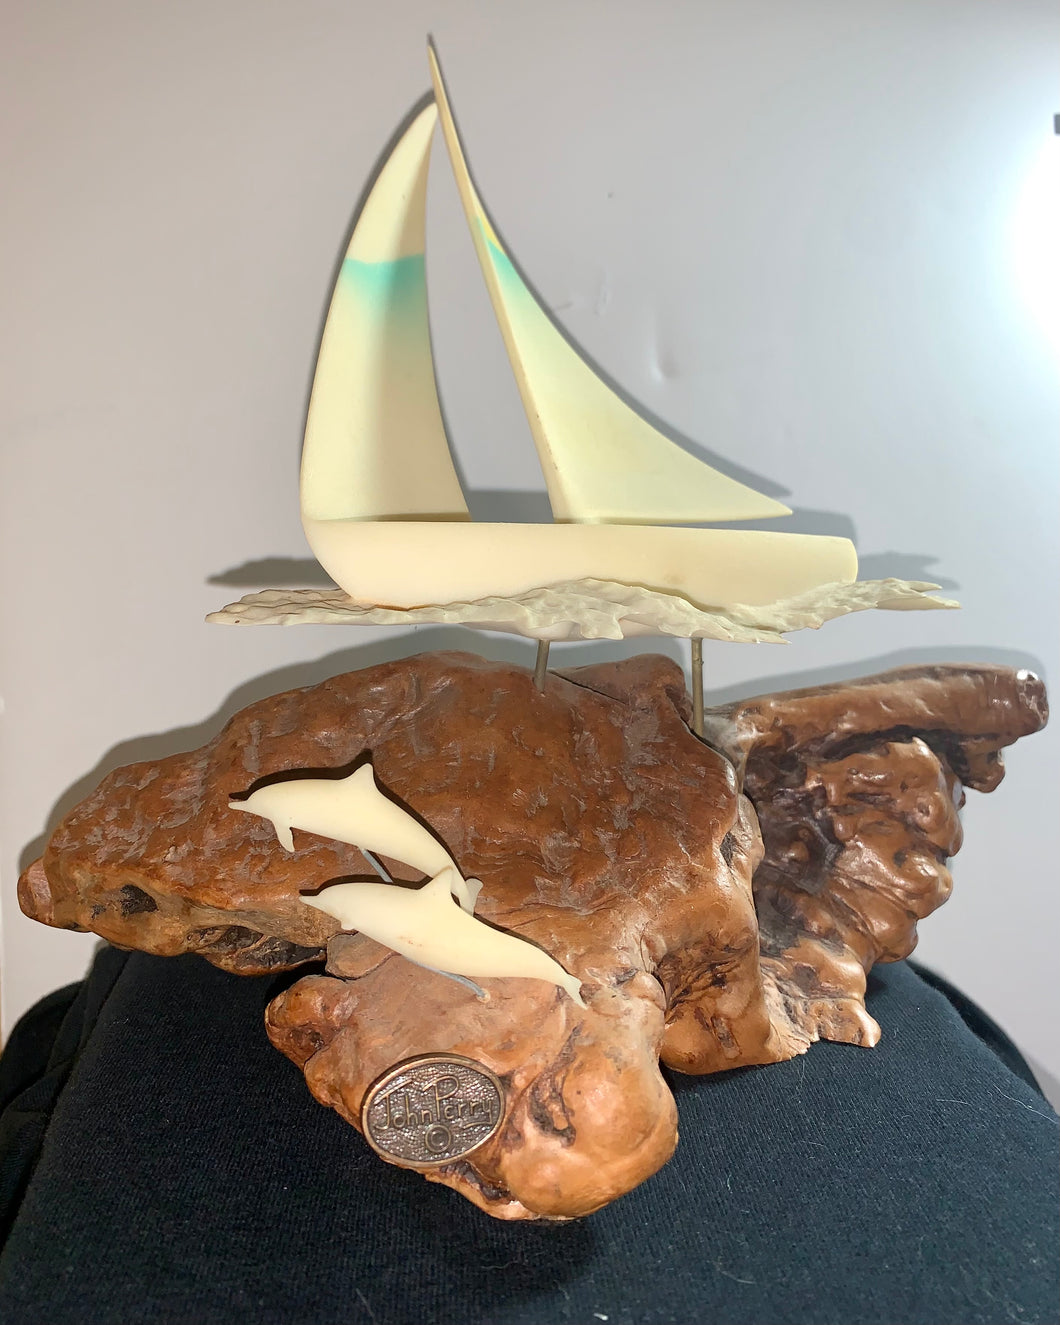 JOHN PERRY SCULPTURE OF A LG SAIL BOAT& DOLPHIN ON LARGE BEAUTIFUL BURL WOOD